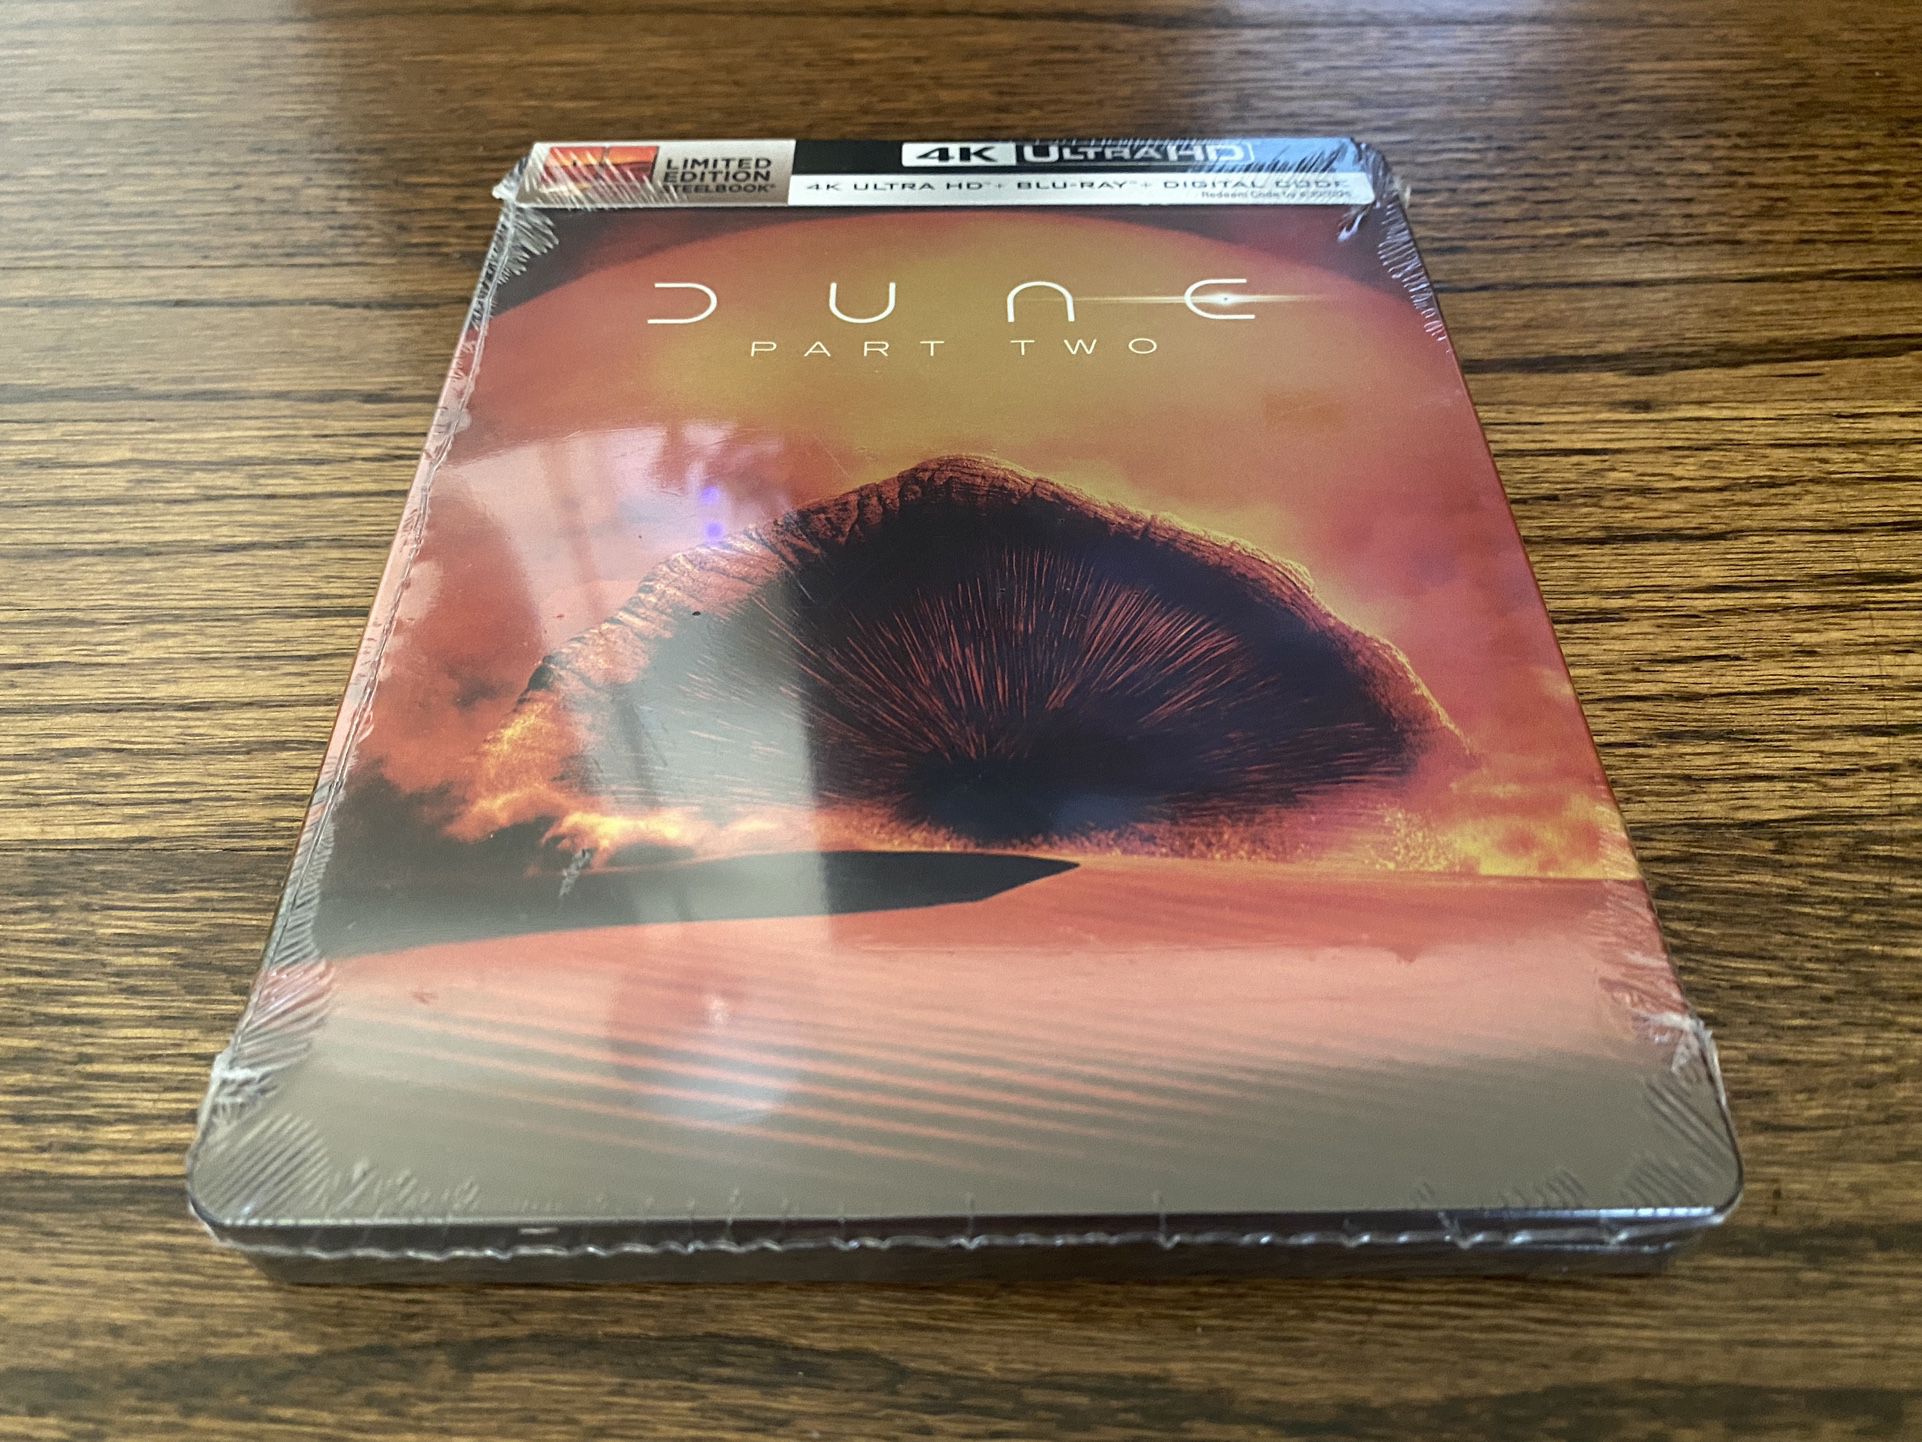 DUNE PART 2 LIMITED EDITION  4K UHD / BLU-RAY STEELBOOK [ BRAND NEW / ON HAND ]